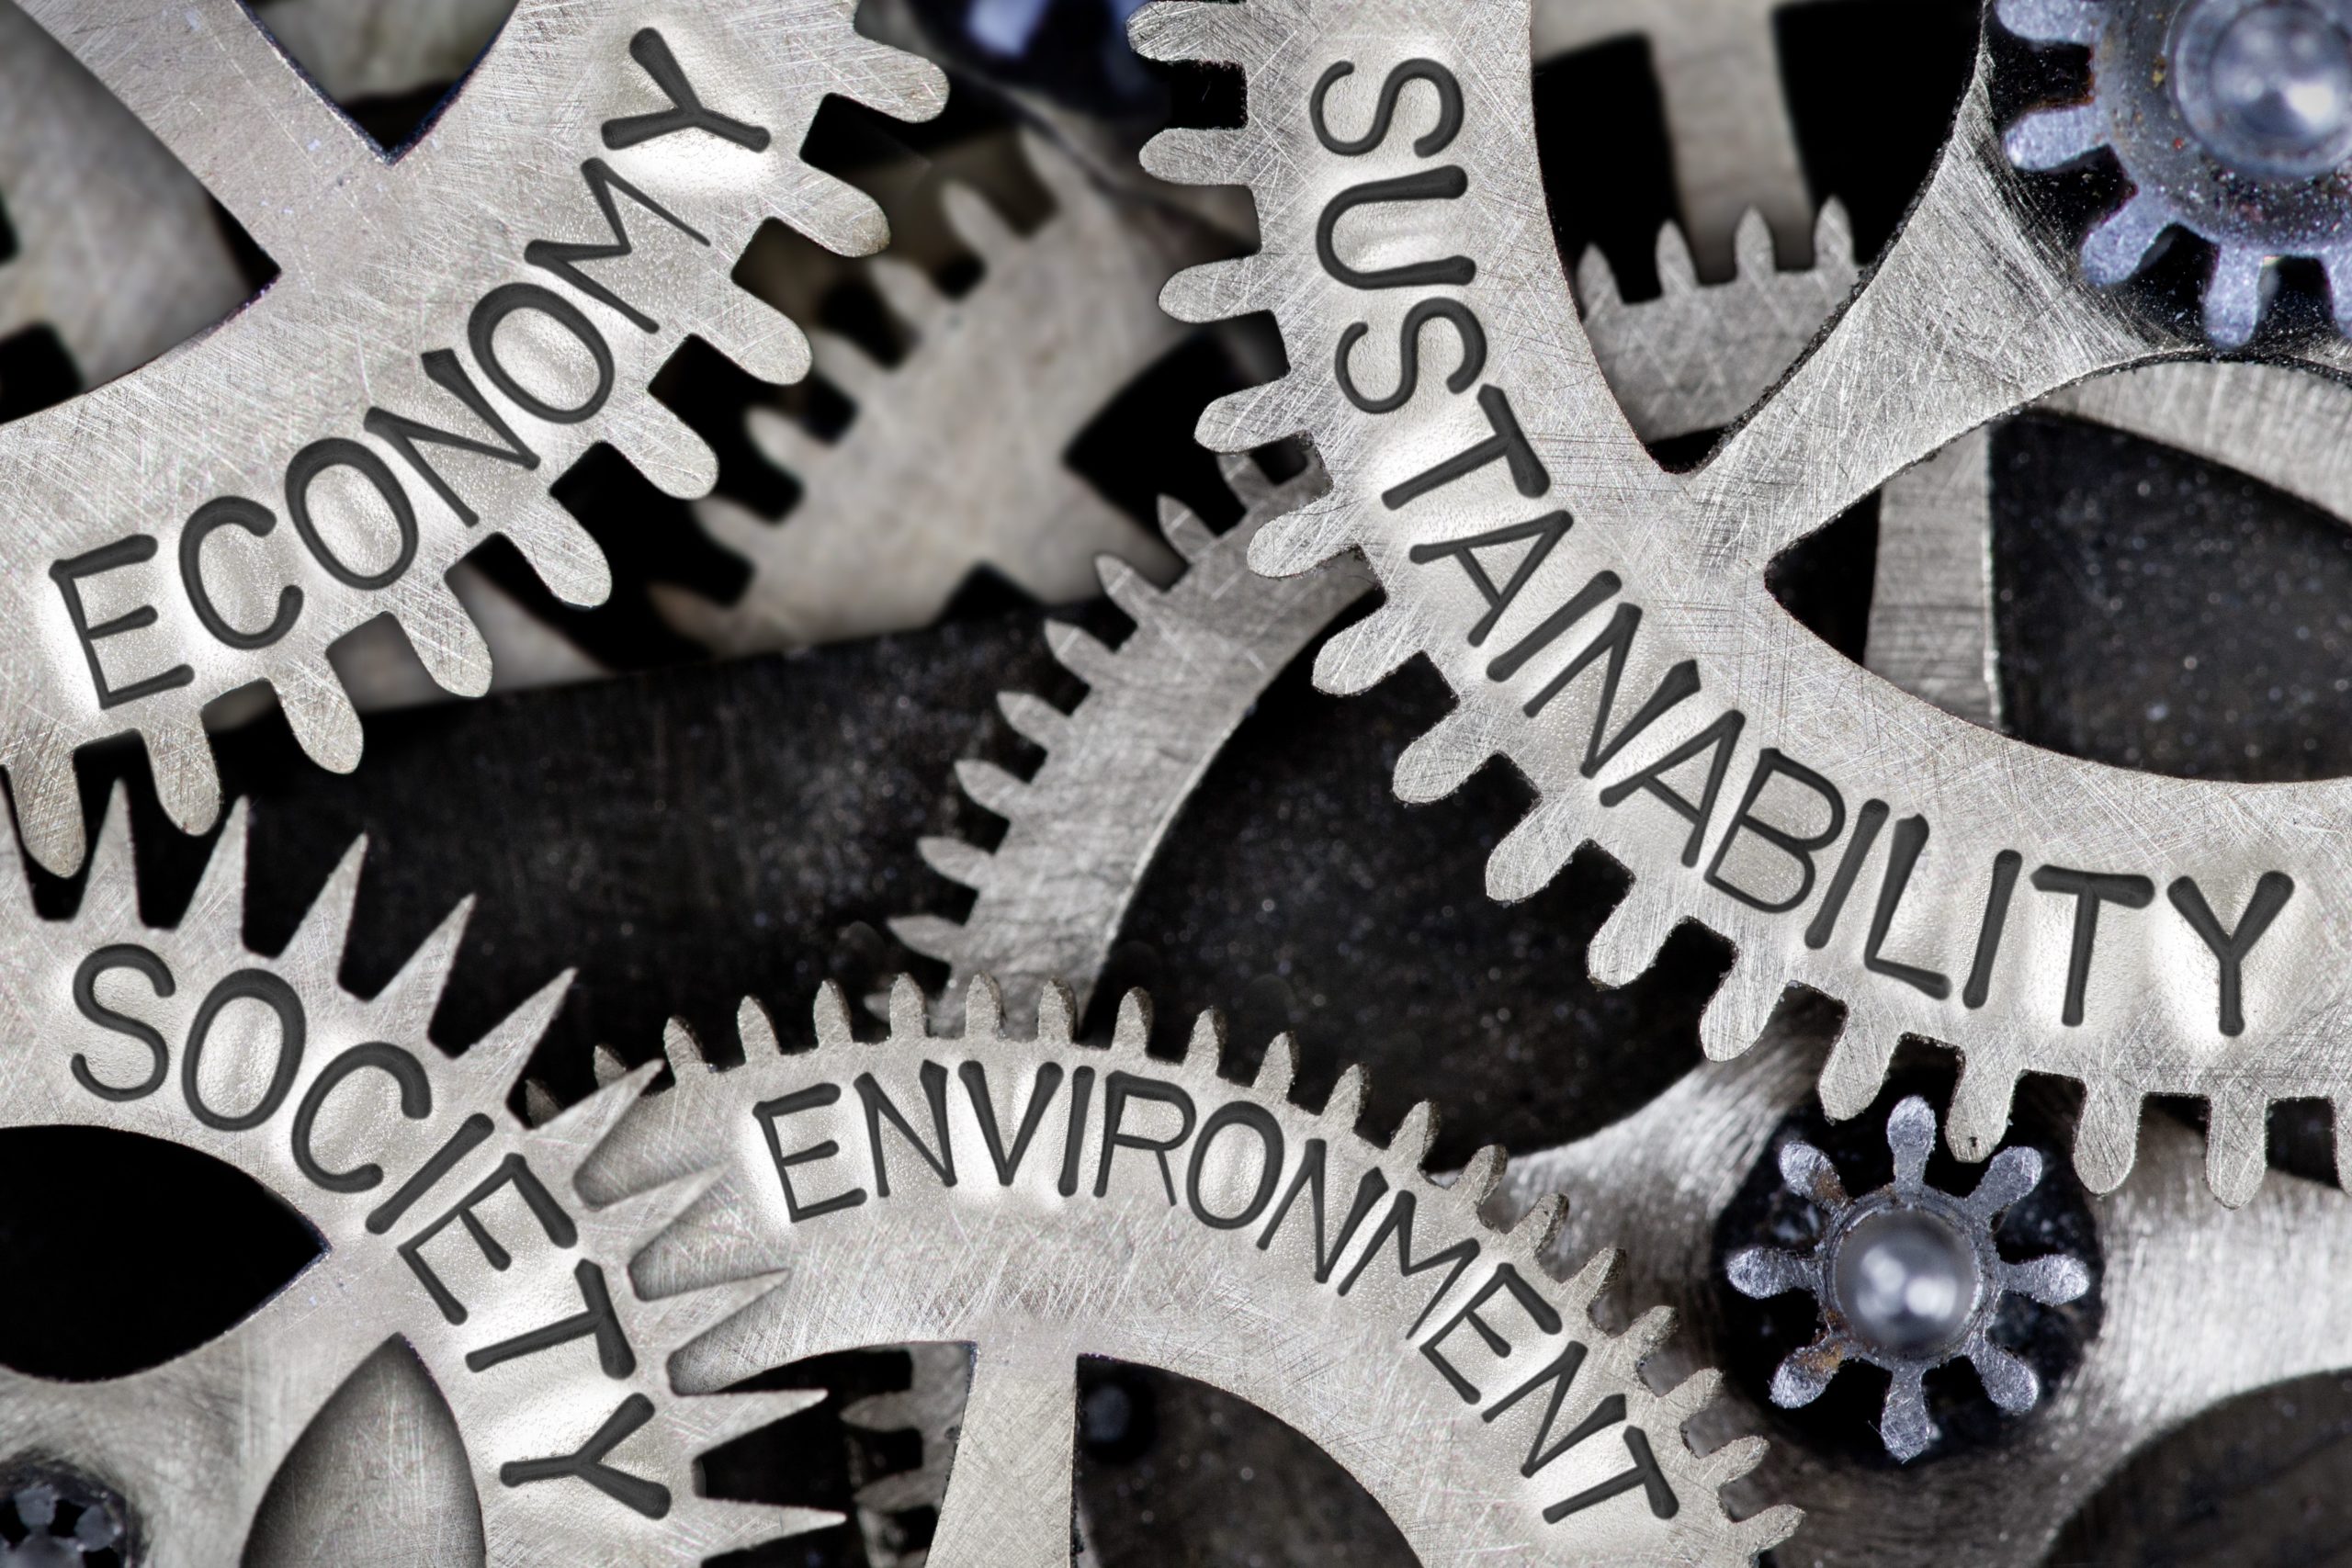 Series of interlinked cogs showing the words Economy, Sustainability, Society and Environment